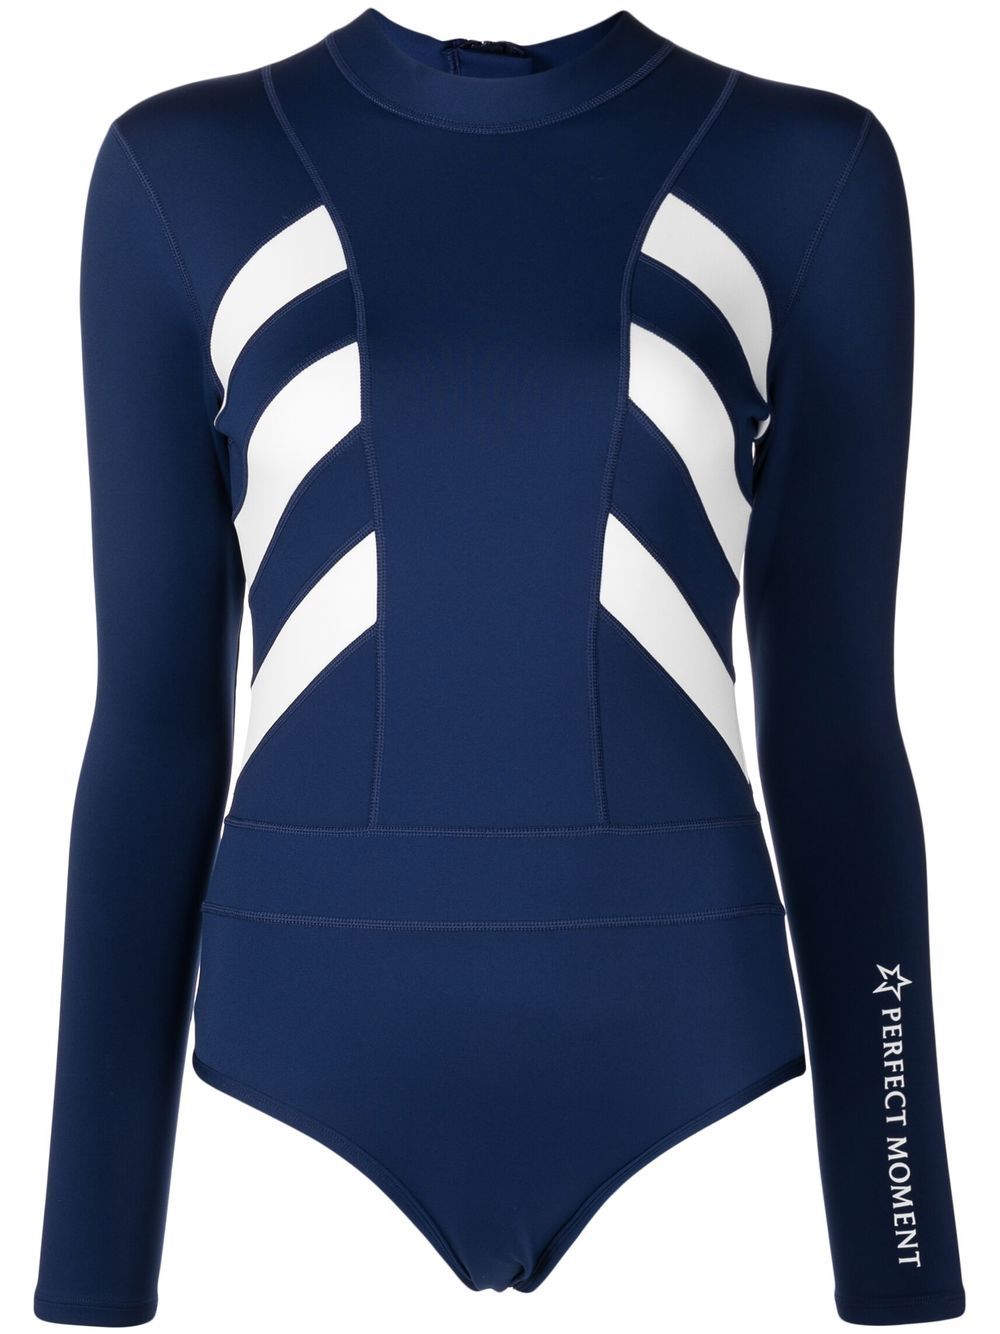 Perfect Moment Imok Neo wetsuit - Blue von Perfect Moment